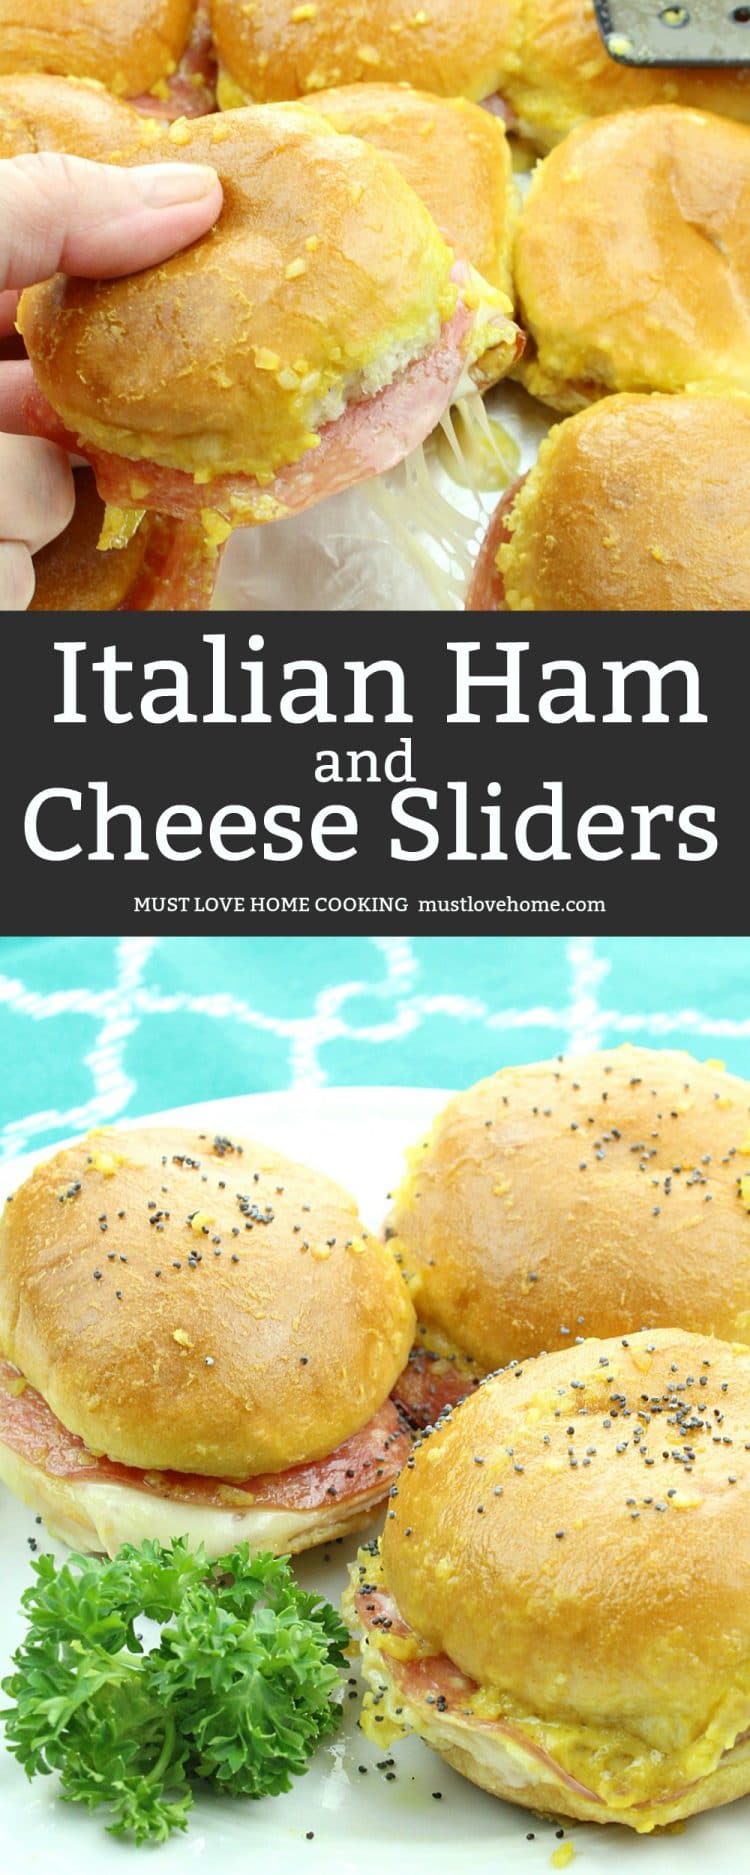 Italian Ham and Cheese Sliders - hot and tangy little sandwiches that are big on flavor.  Savory ham, spicy salami, velvety swiss cheese and a zippy mustard sauce combine to make an irresistible snack or a meal that everyone will love!